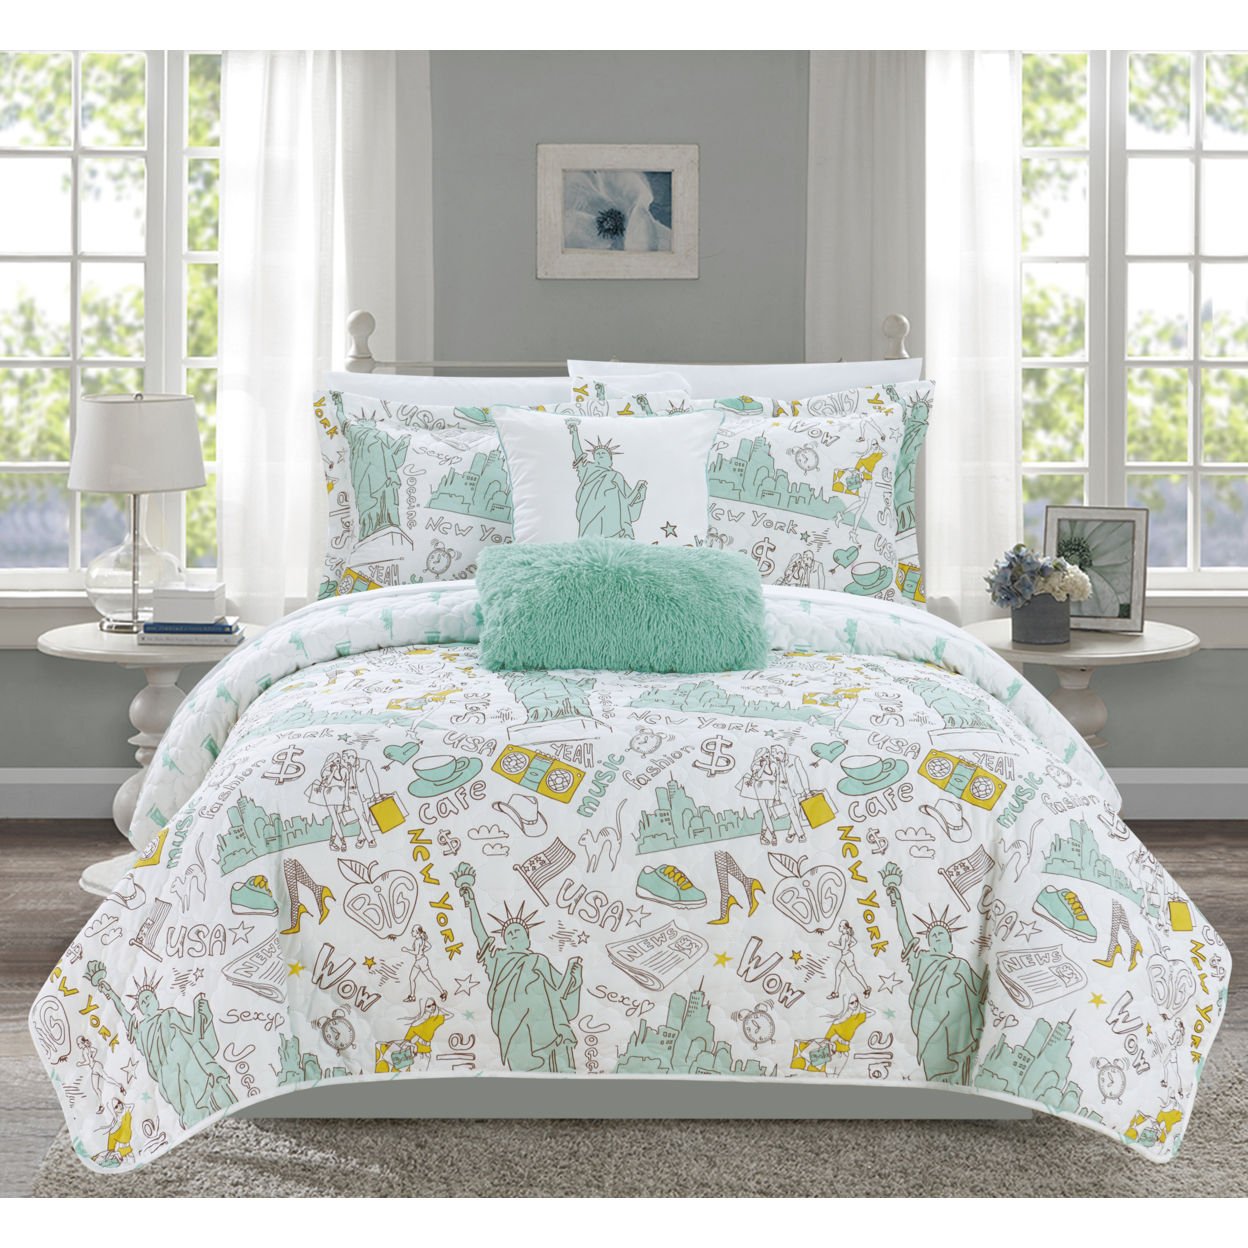 Bay Park 5 Or 4 Piece Reversible Quilt Set Bay Park City Inspired Printed Design Coverlet Bedding - Green, Queen